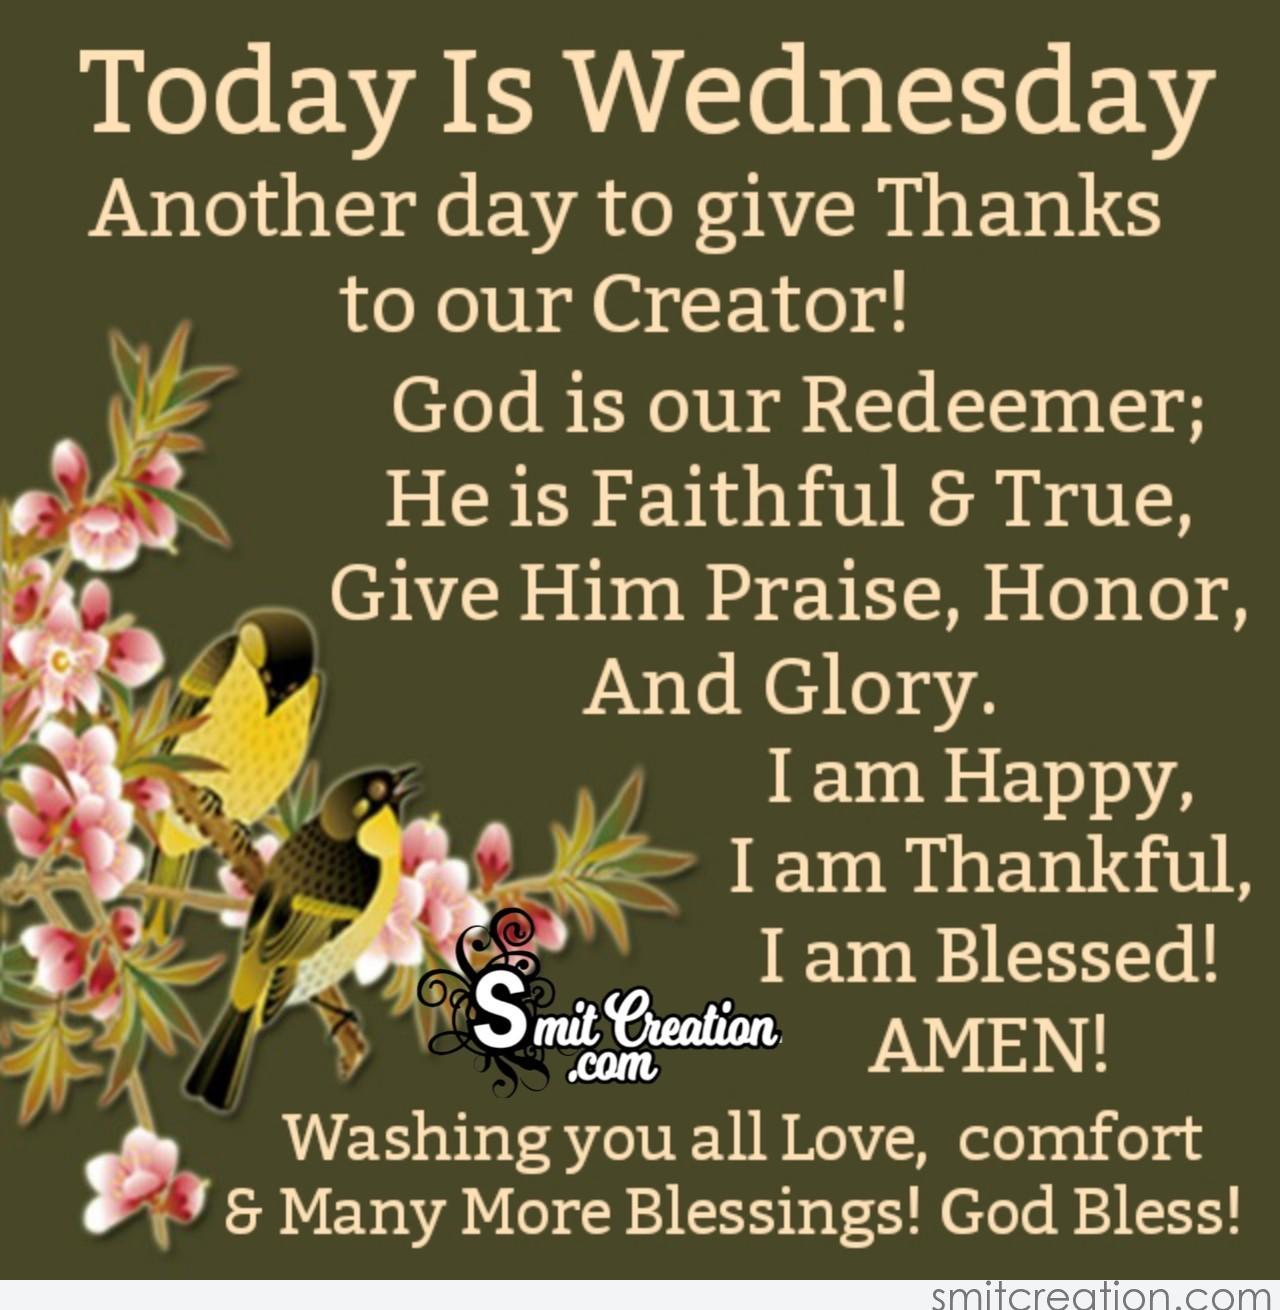 Thanks To Our Creator For Blessed Wednesday - SmitCreation.com